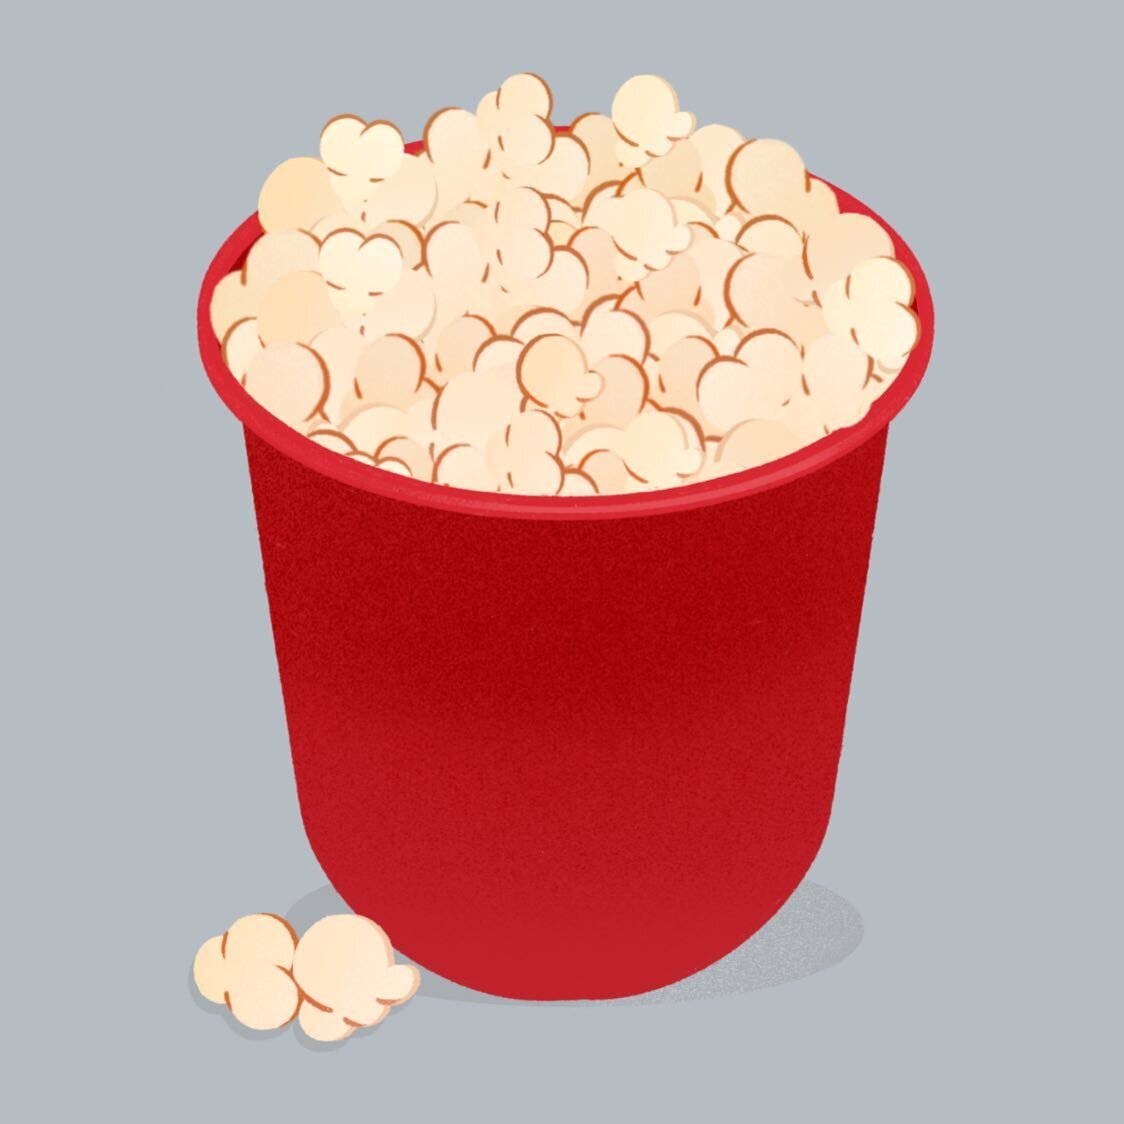 Any popcorn lovers out there?

#popcorn #drawing #illustraion 
#procreate